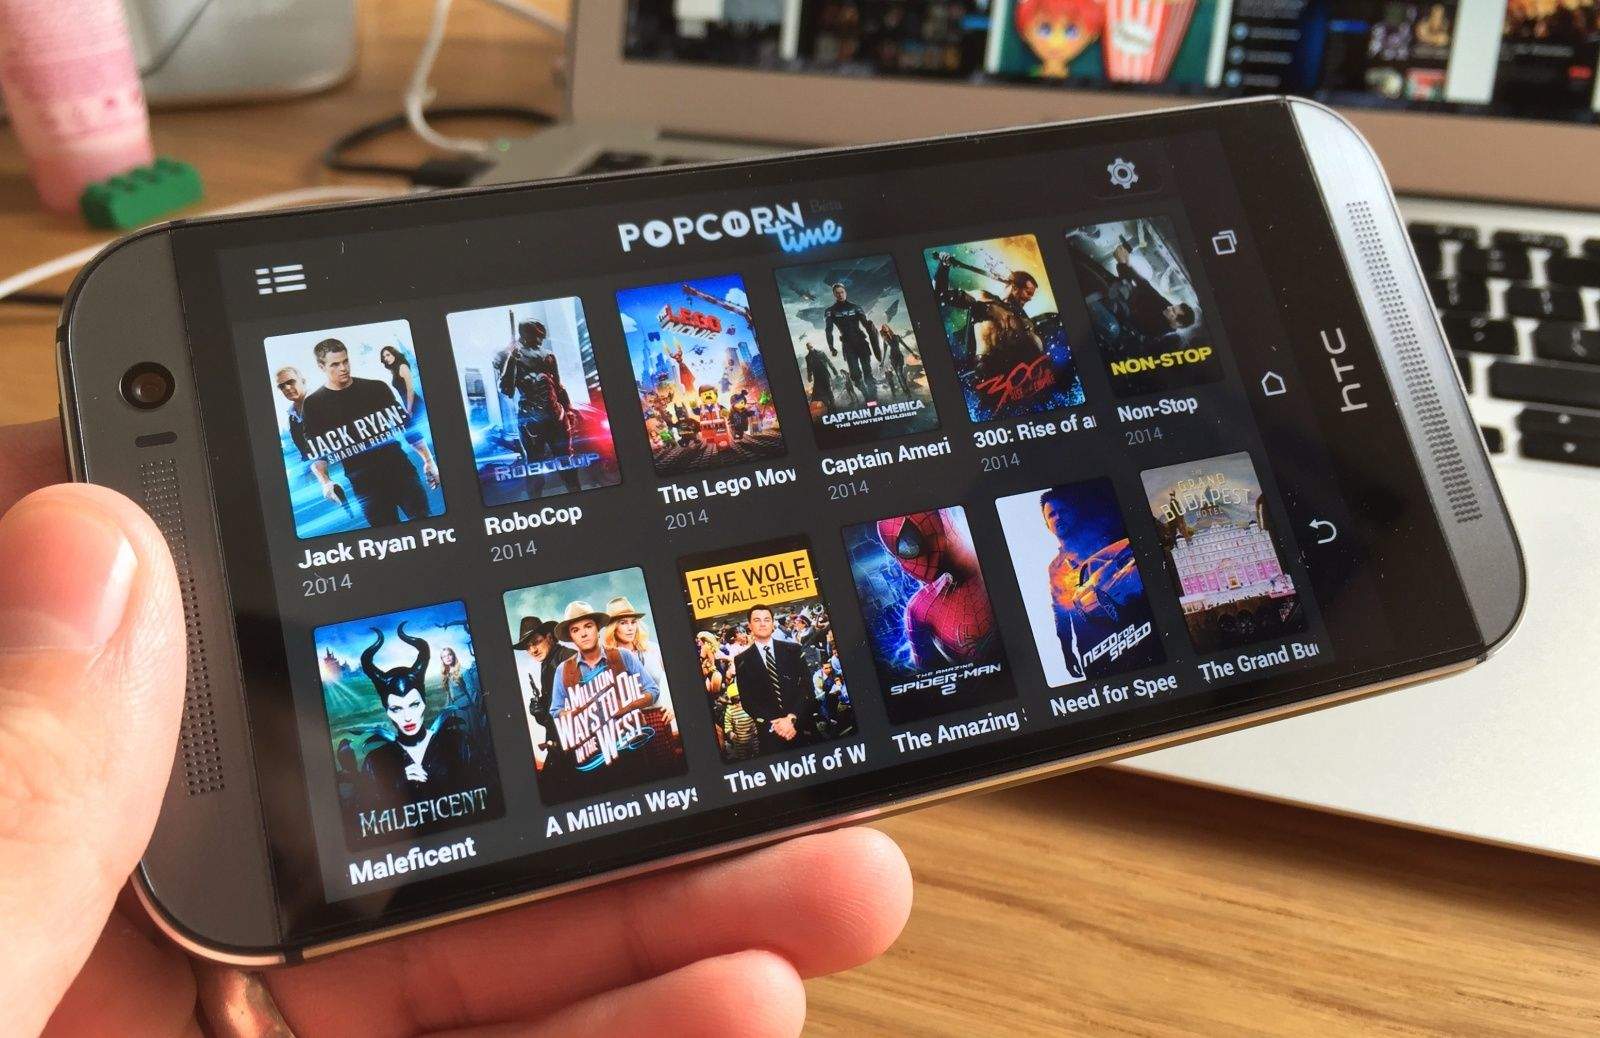 The Popcorn Time app on Android. Photo: Killian Bell/Cult of Mac